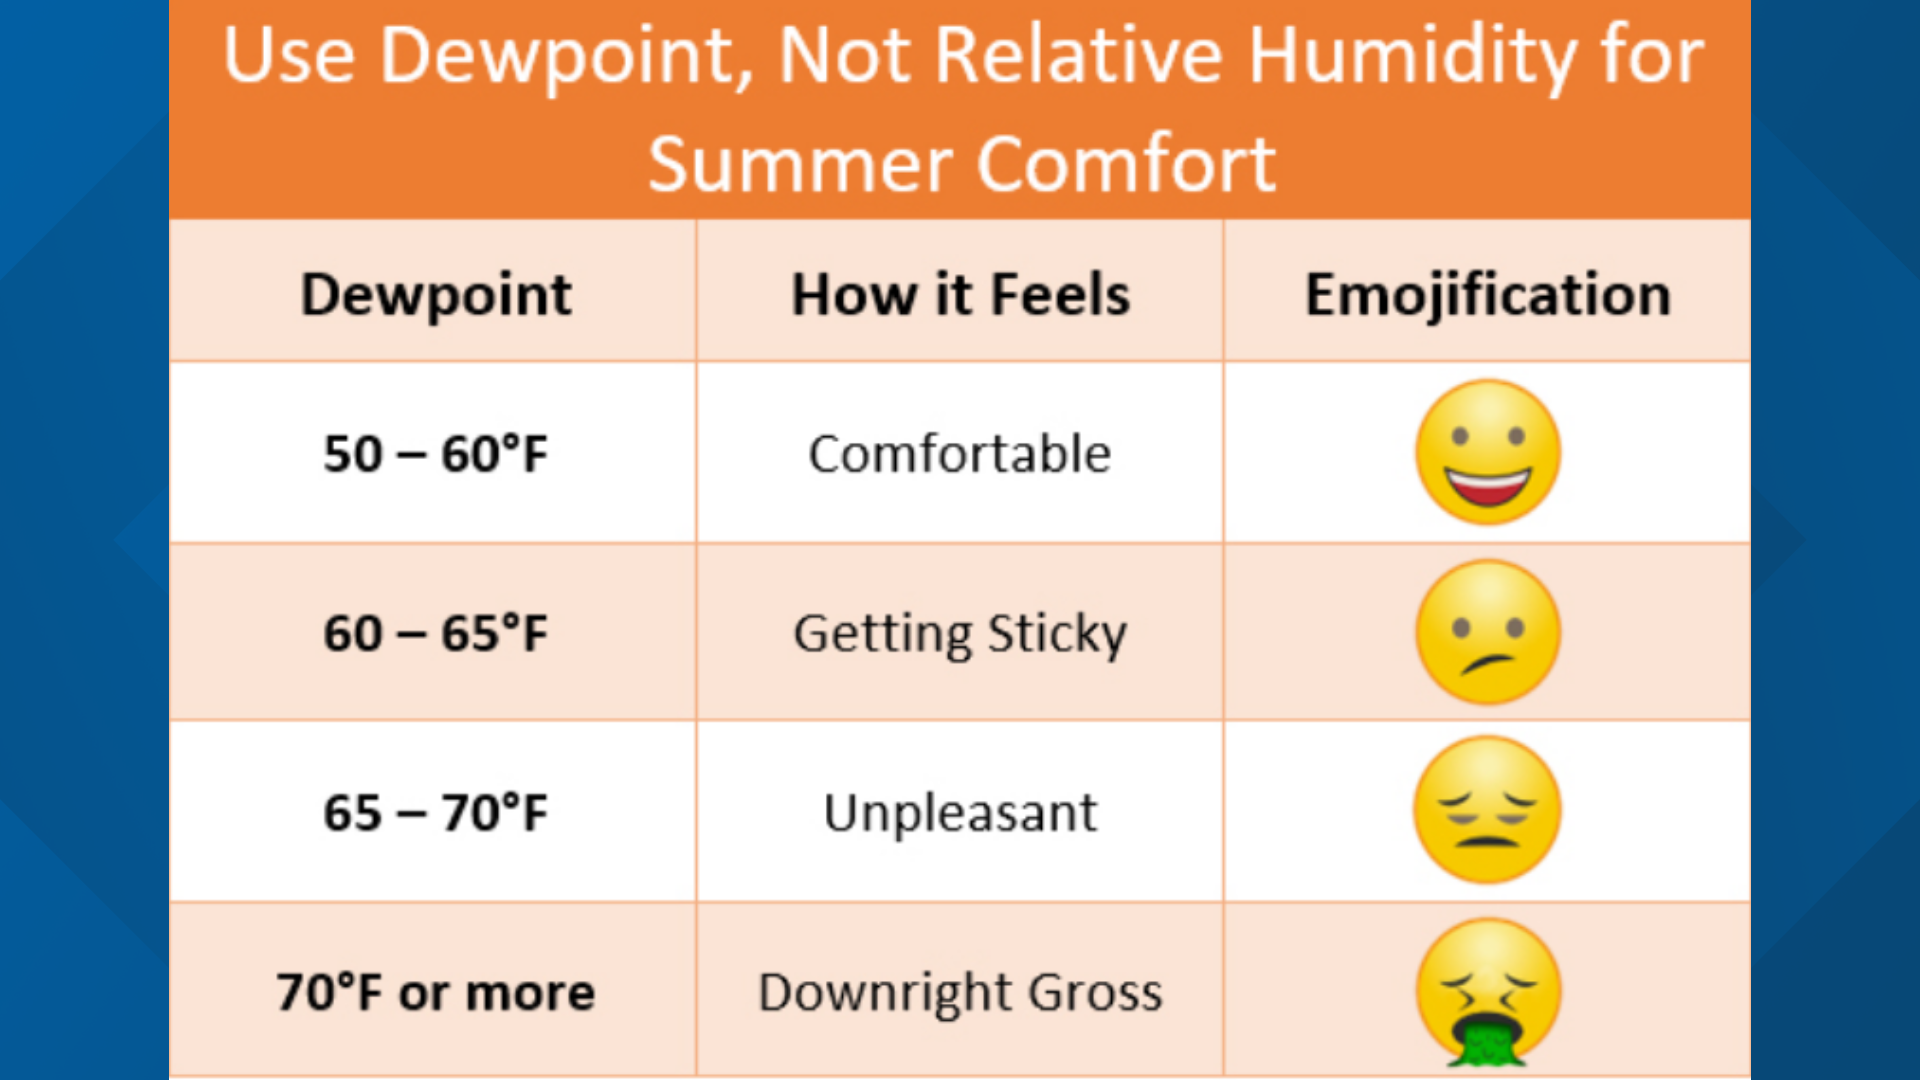 What is Dew Point?